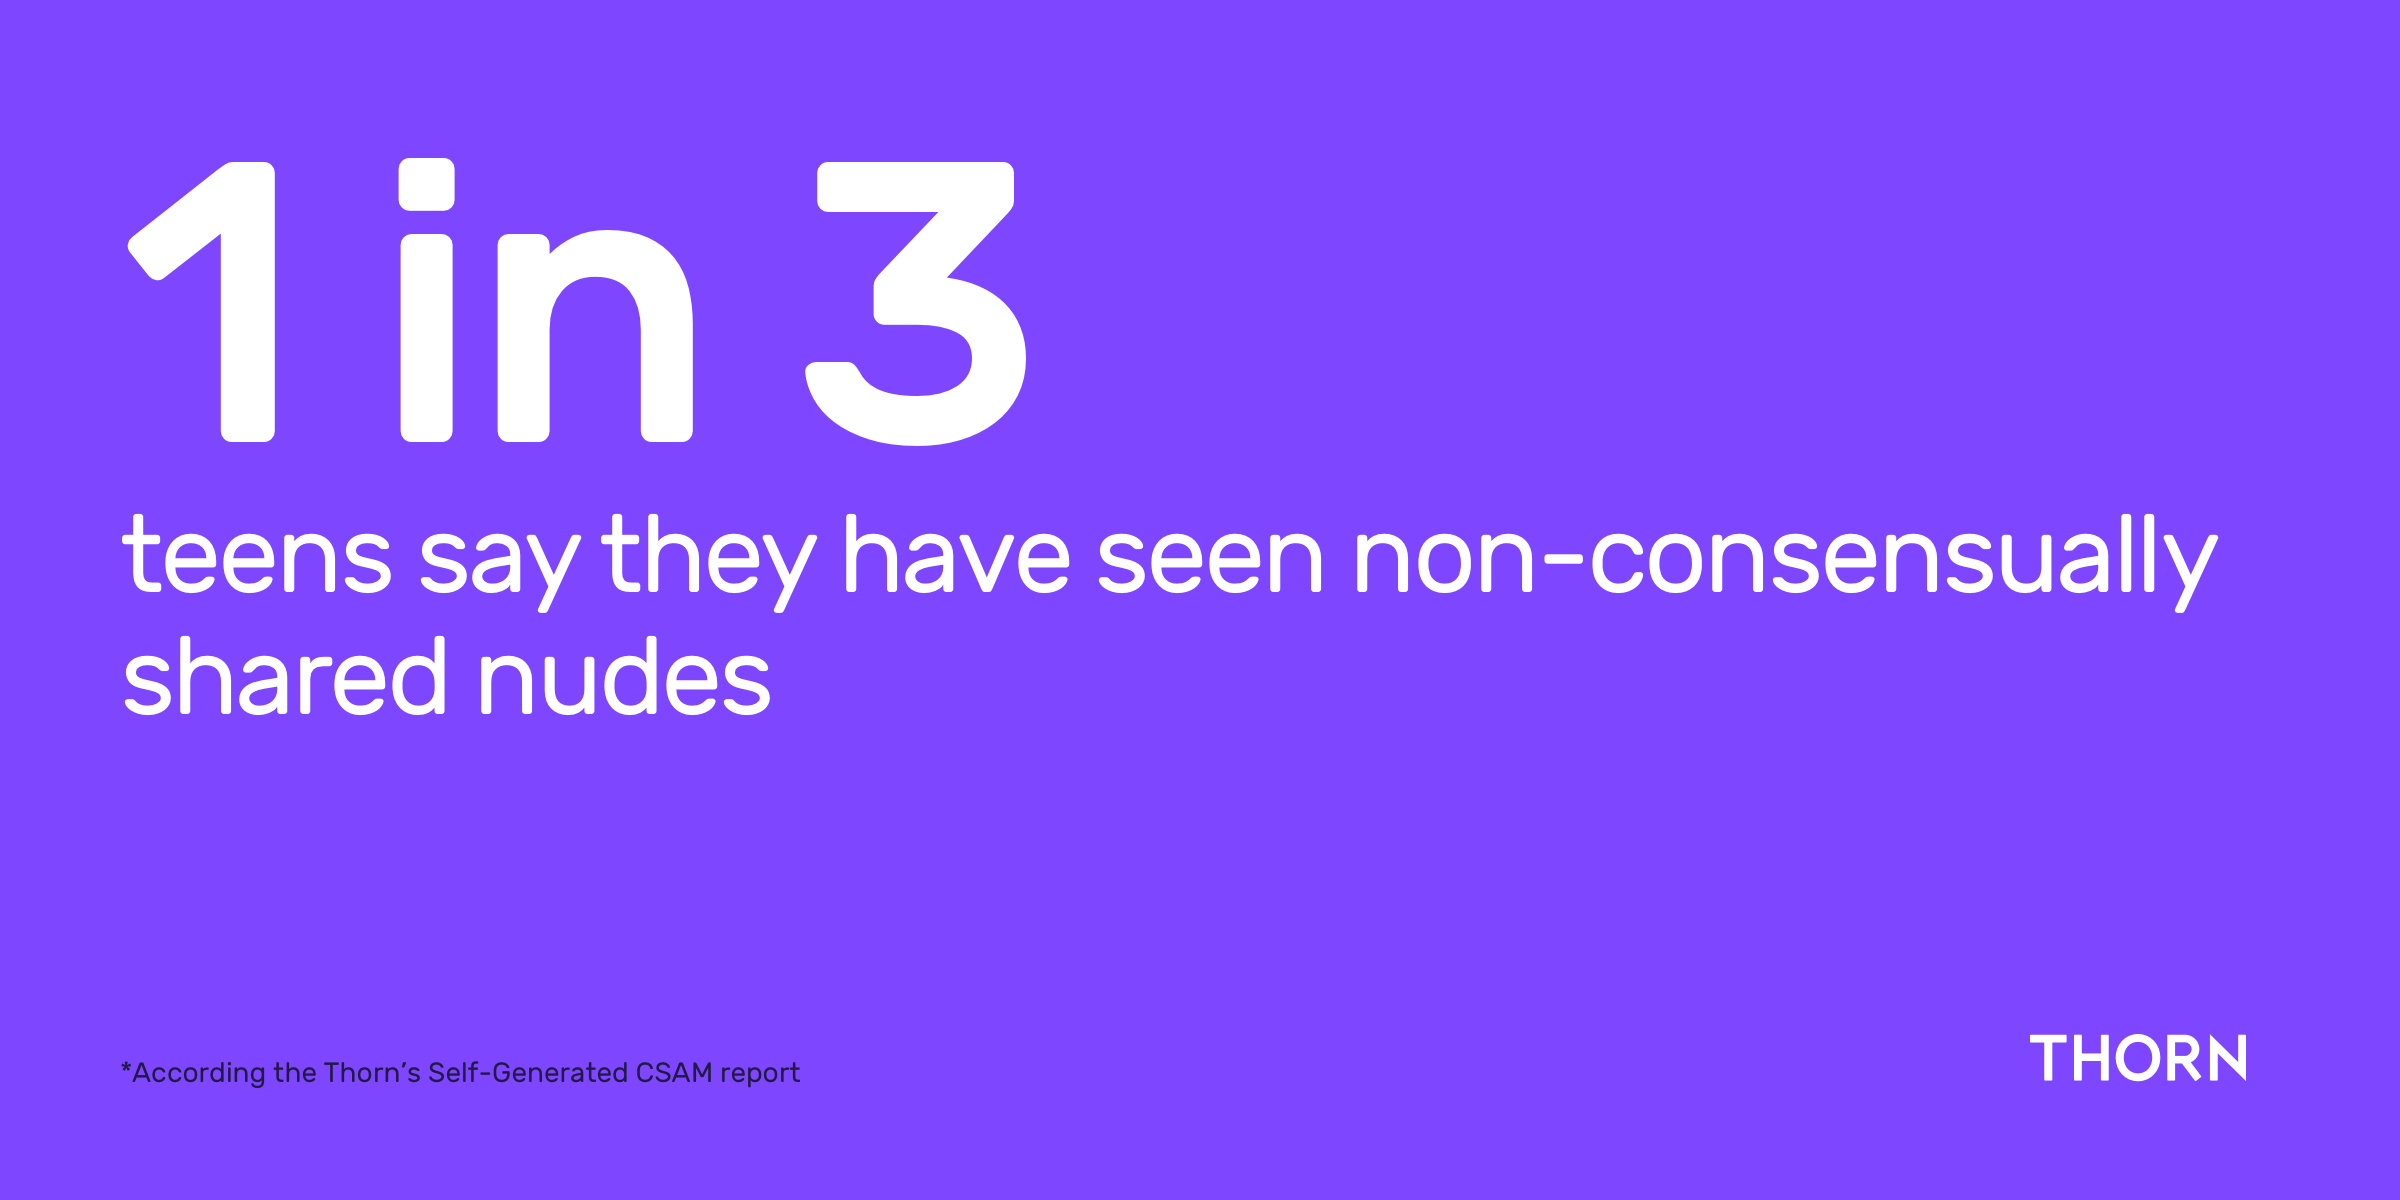 1 in 3 teens have seen non-consensually shared nudes.